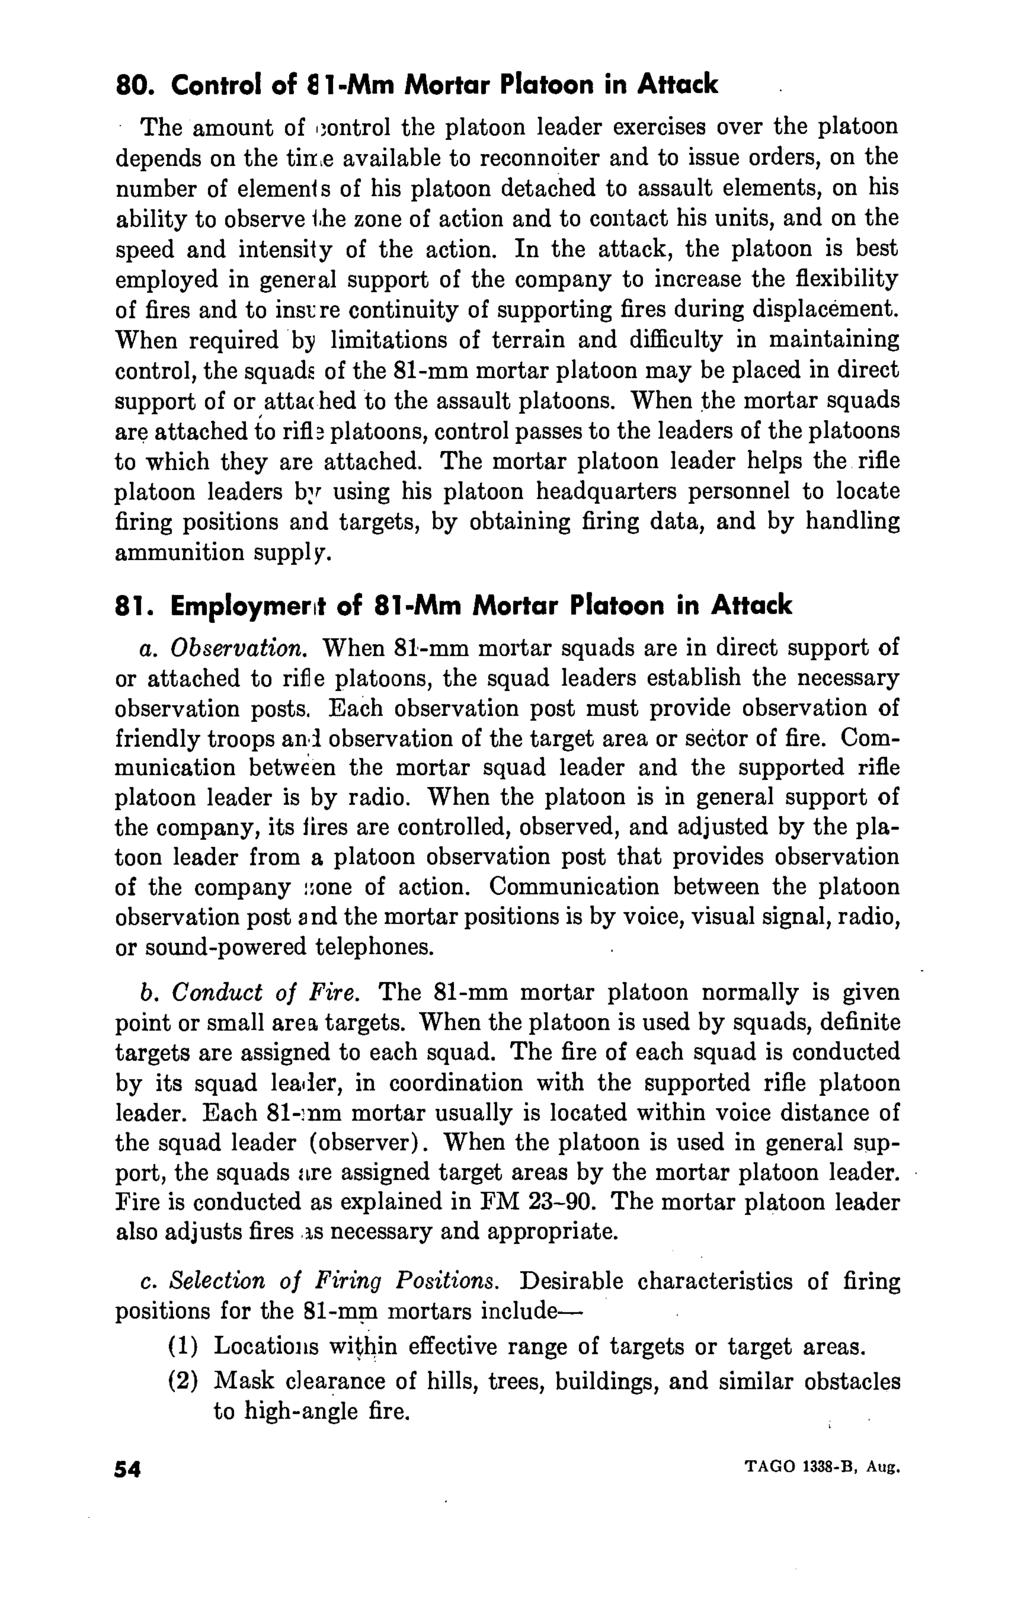 80. Control of E 1-Mm Mortar Platoon in Attack The amount of control the platoon leader exercises over the platoon depends on the timre available to reconnoiter and to issue orders, on the number of